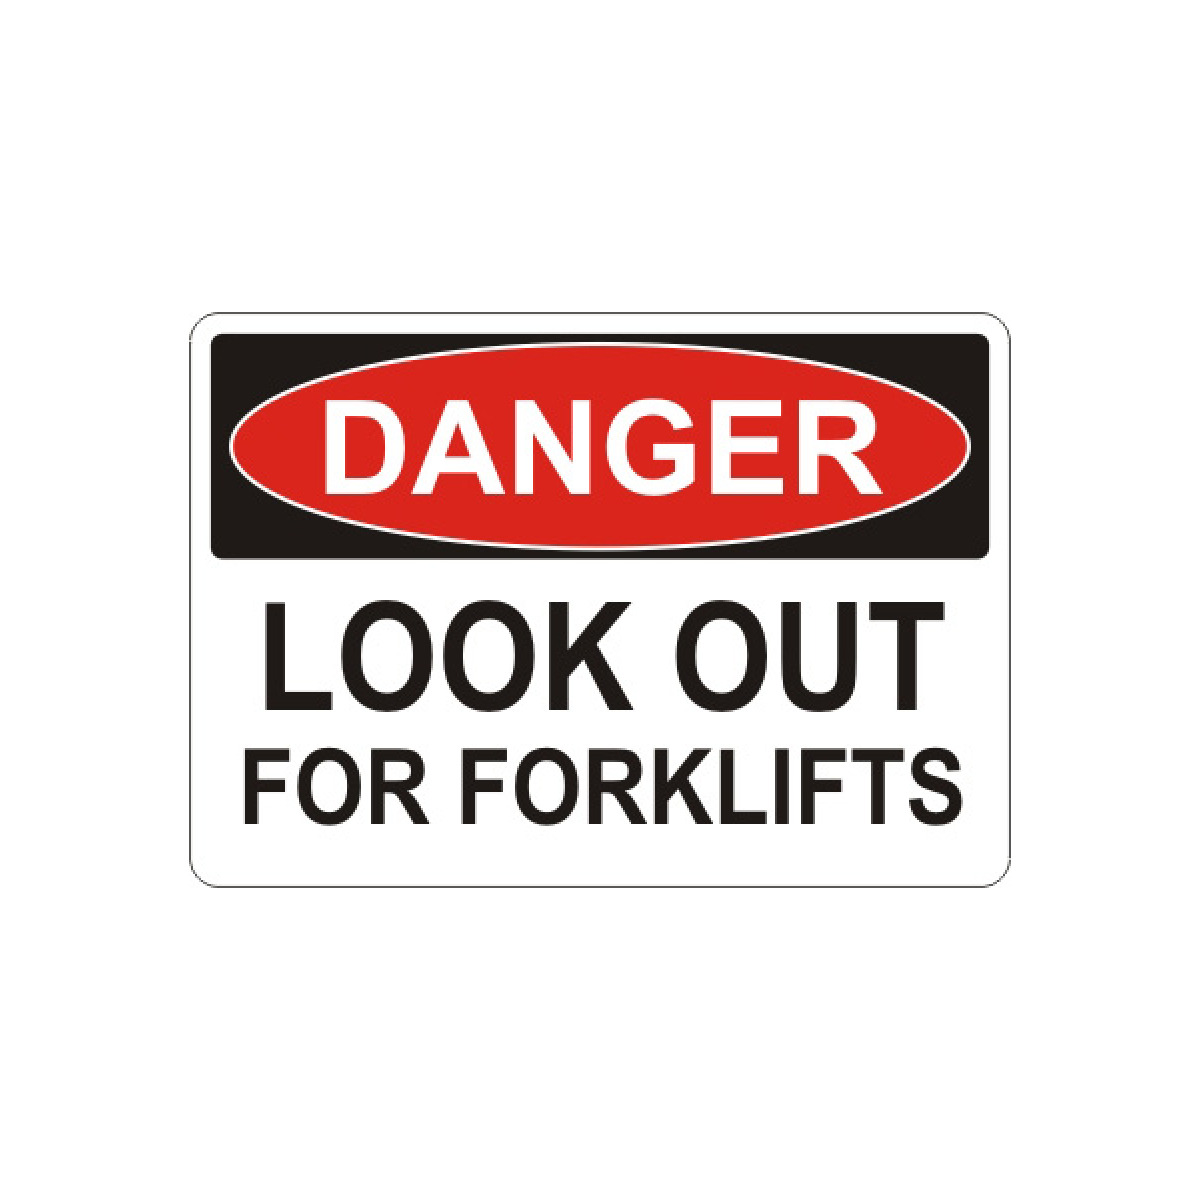 Warehouse Industrial safety signs for danger, warning, notice and identification